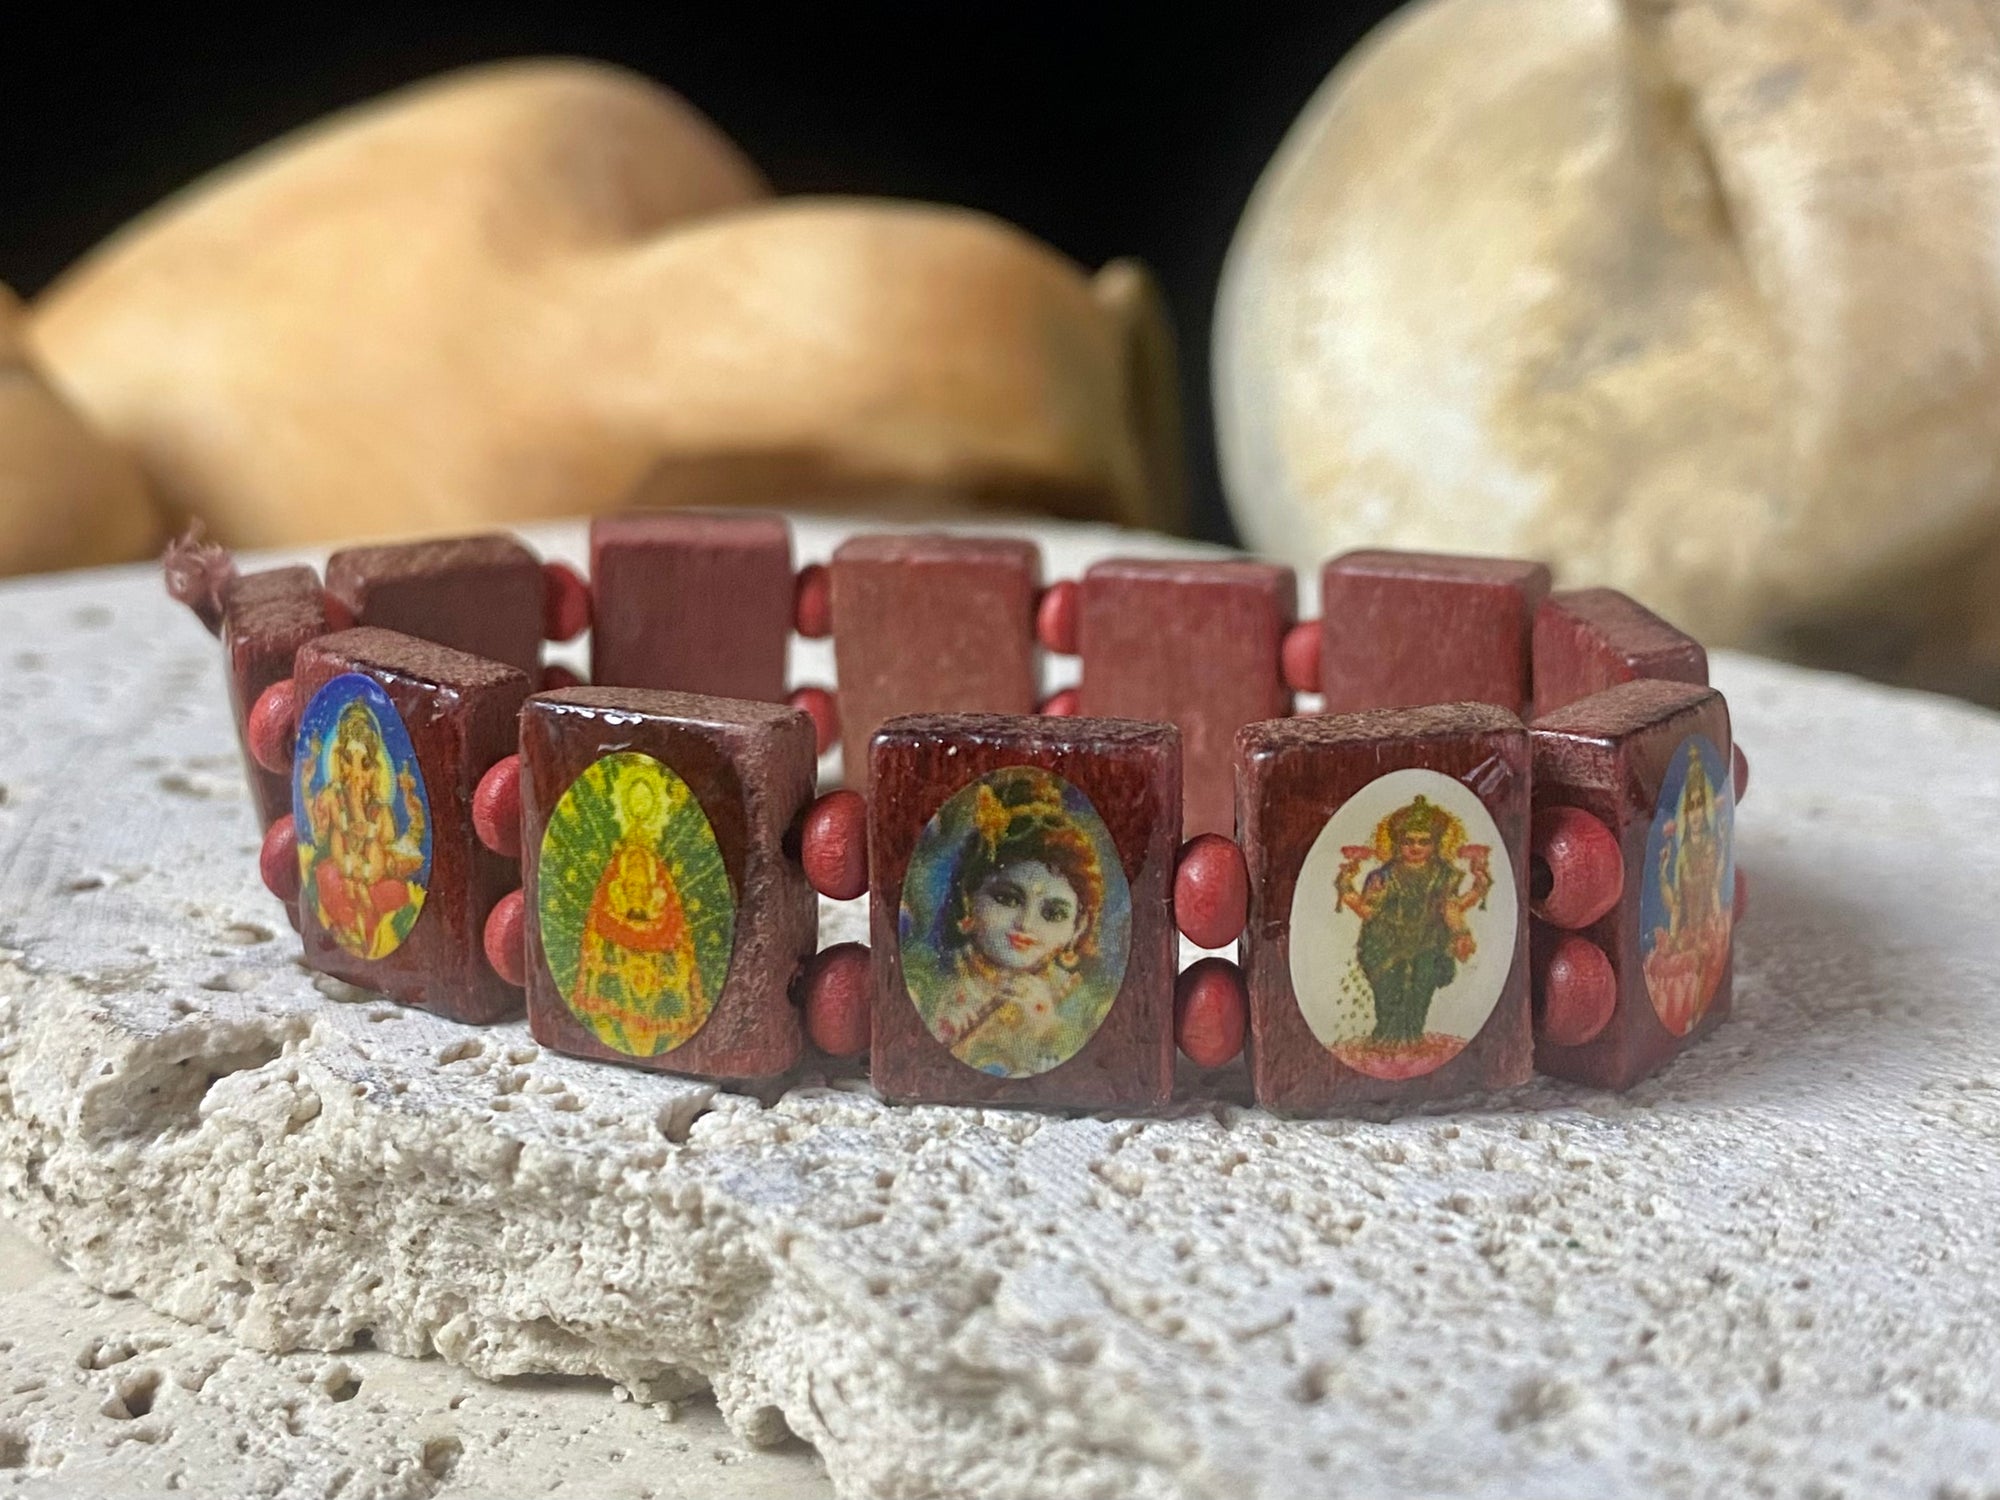 Simple, lightweight and fun, this elasticised bracelet is made up of small panels that feature images of various Hindu gods, including Lakshmi, Ganesh, Krishna and more. This is a great one for the kids, or if you'd simply like some universal protection.  Measurements: Panels 1.2 x 1.5 cm, inside bracelet circumference 15 cm.